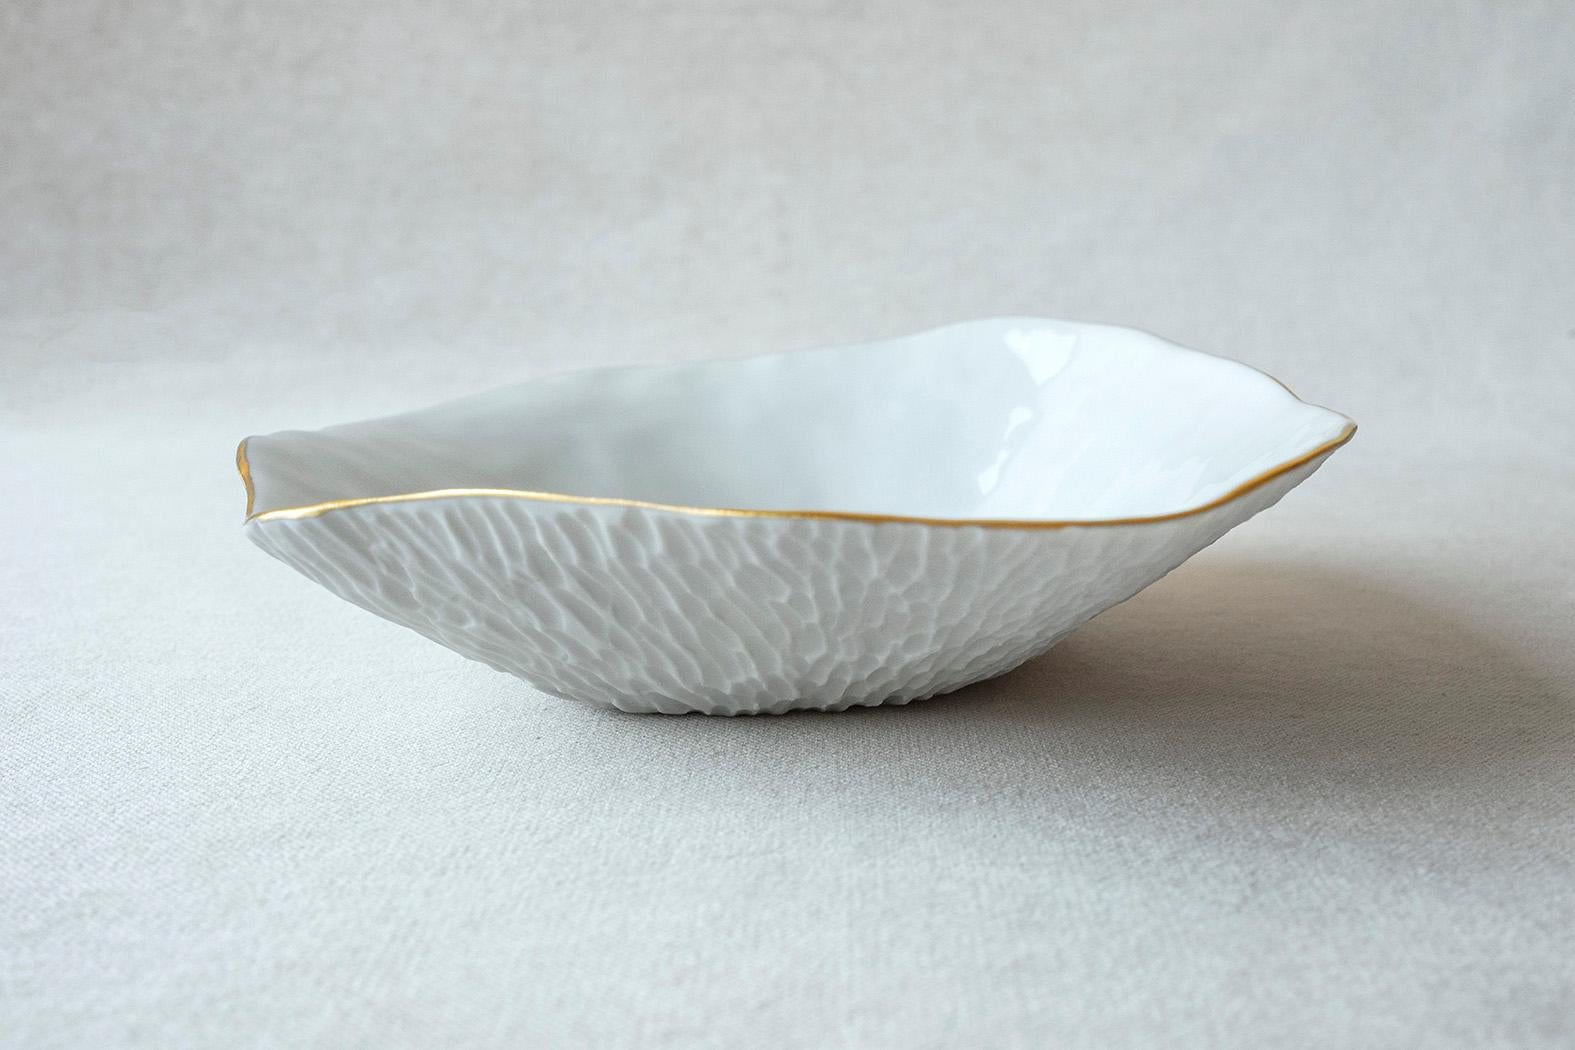 Contemporary Indulge Nº9 / Golden Rim / Small Plate, Handmade Porcelain Tableware For Sale